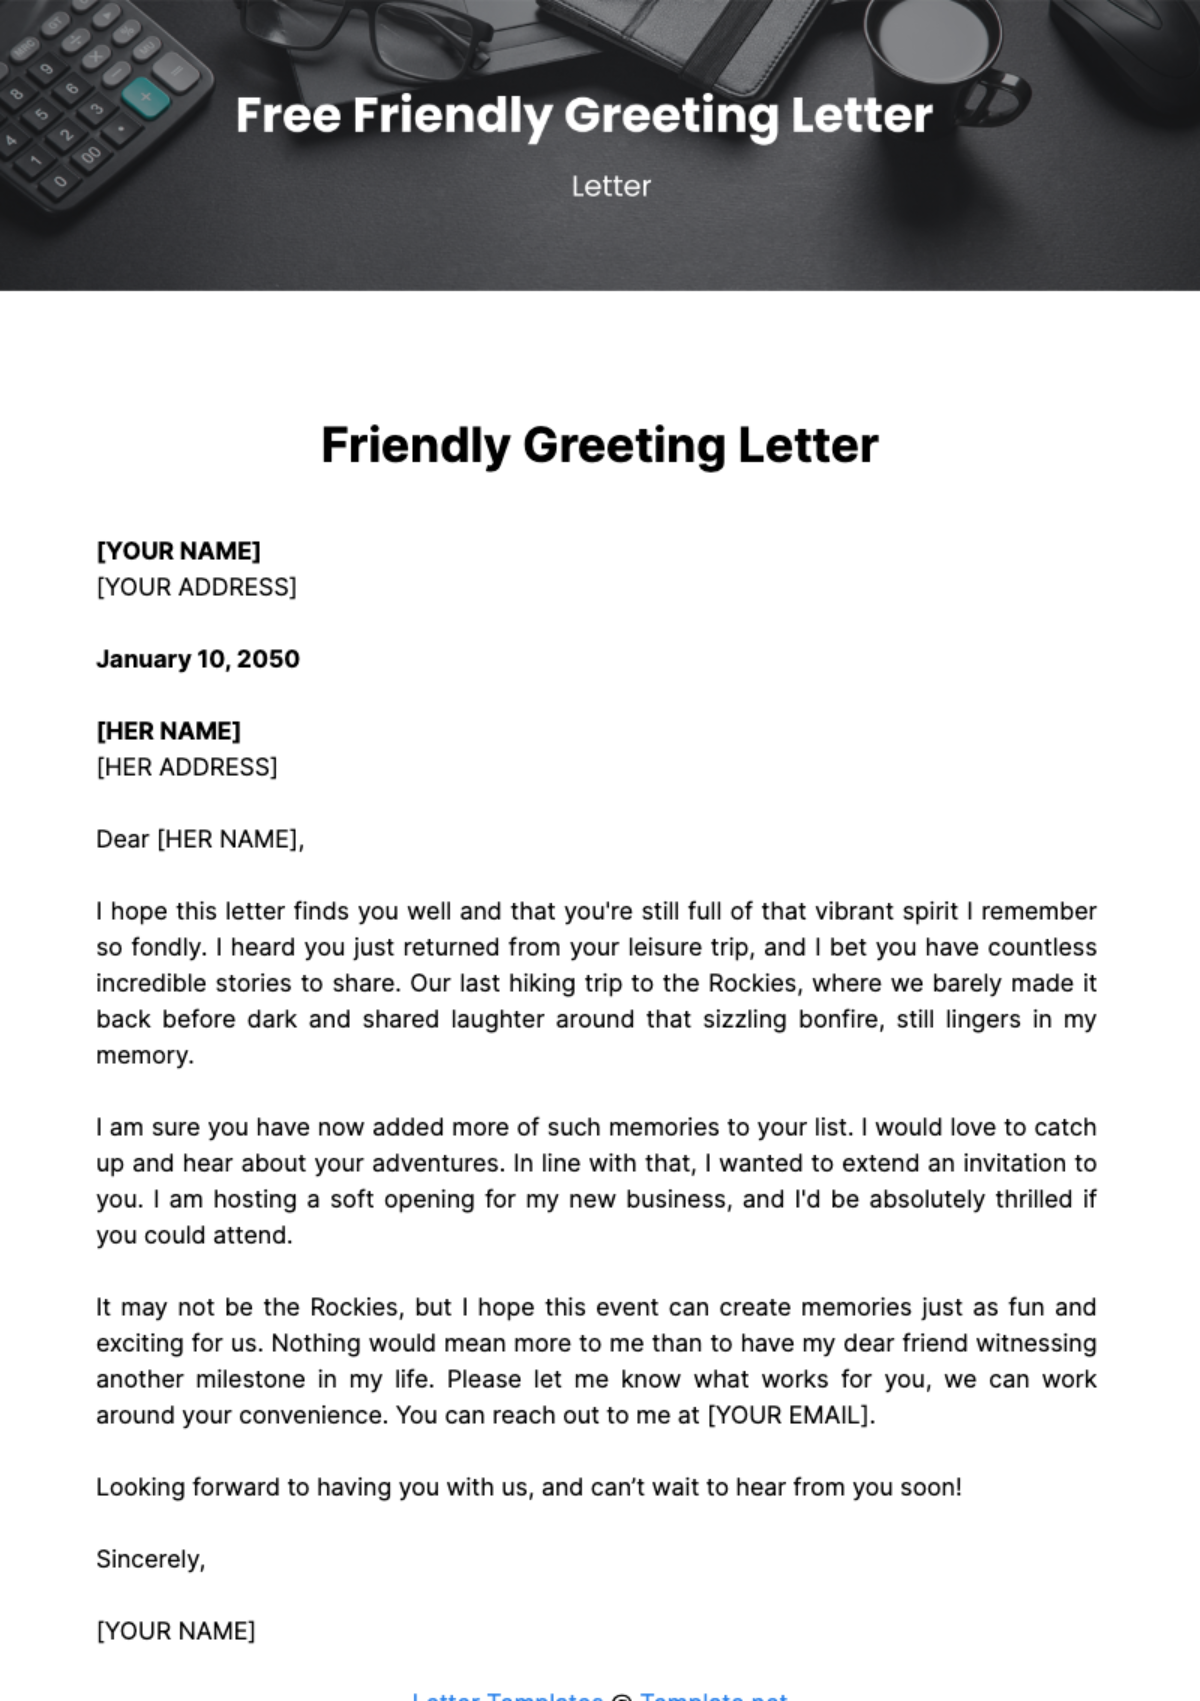 Free Friendly Greeting Letter Template